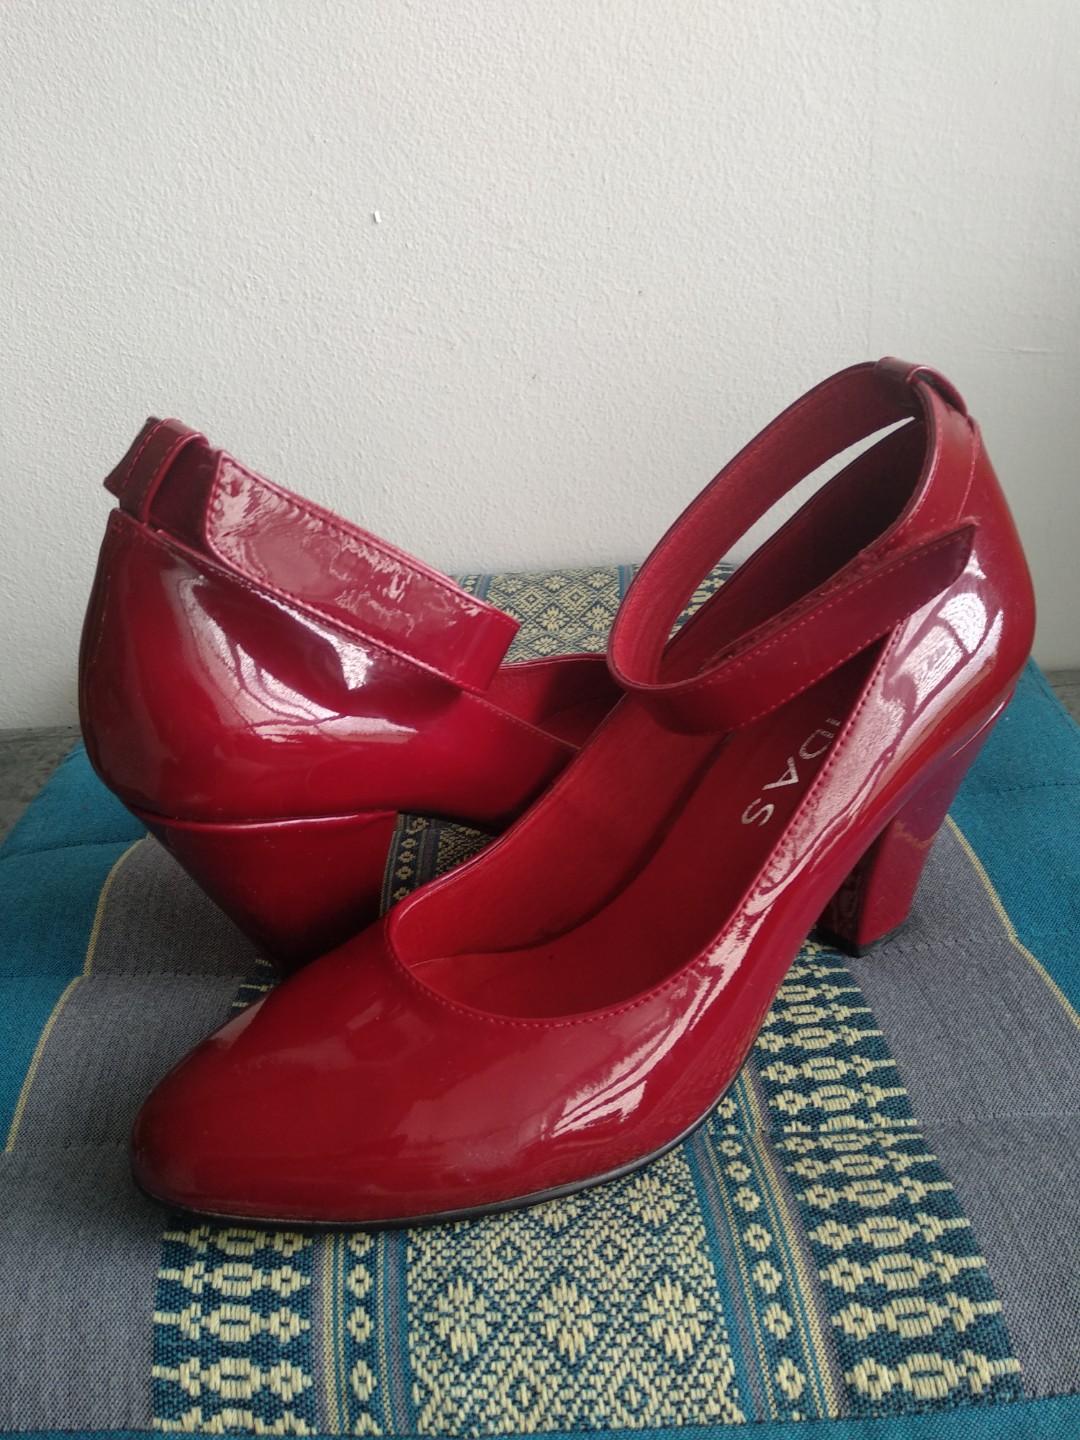 Red patent leather shoes - comfy and 